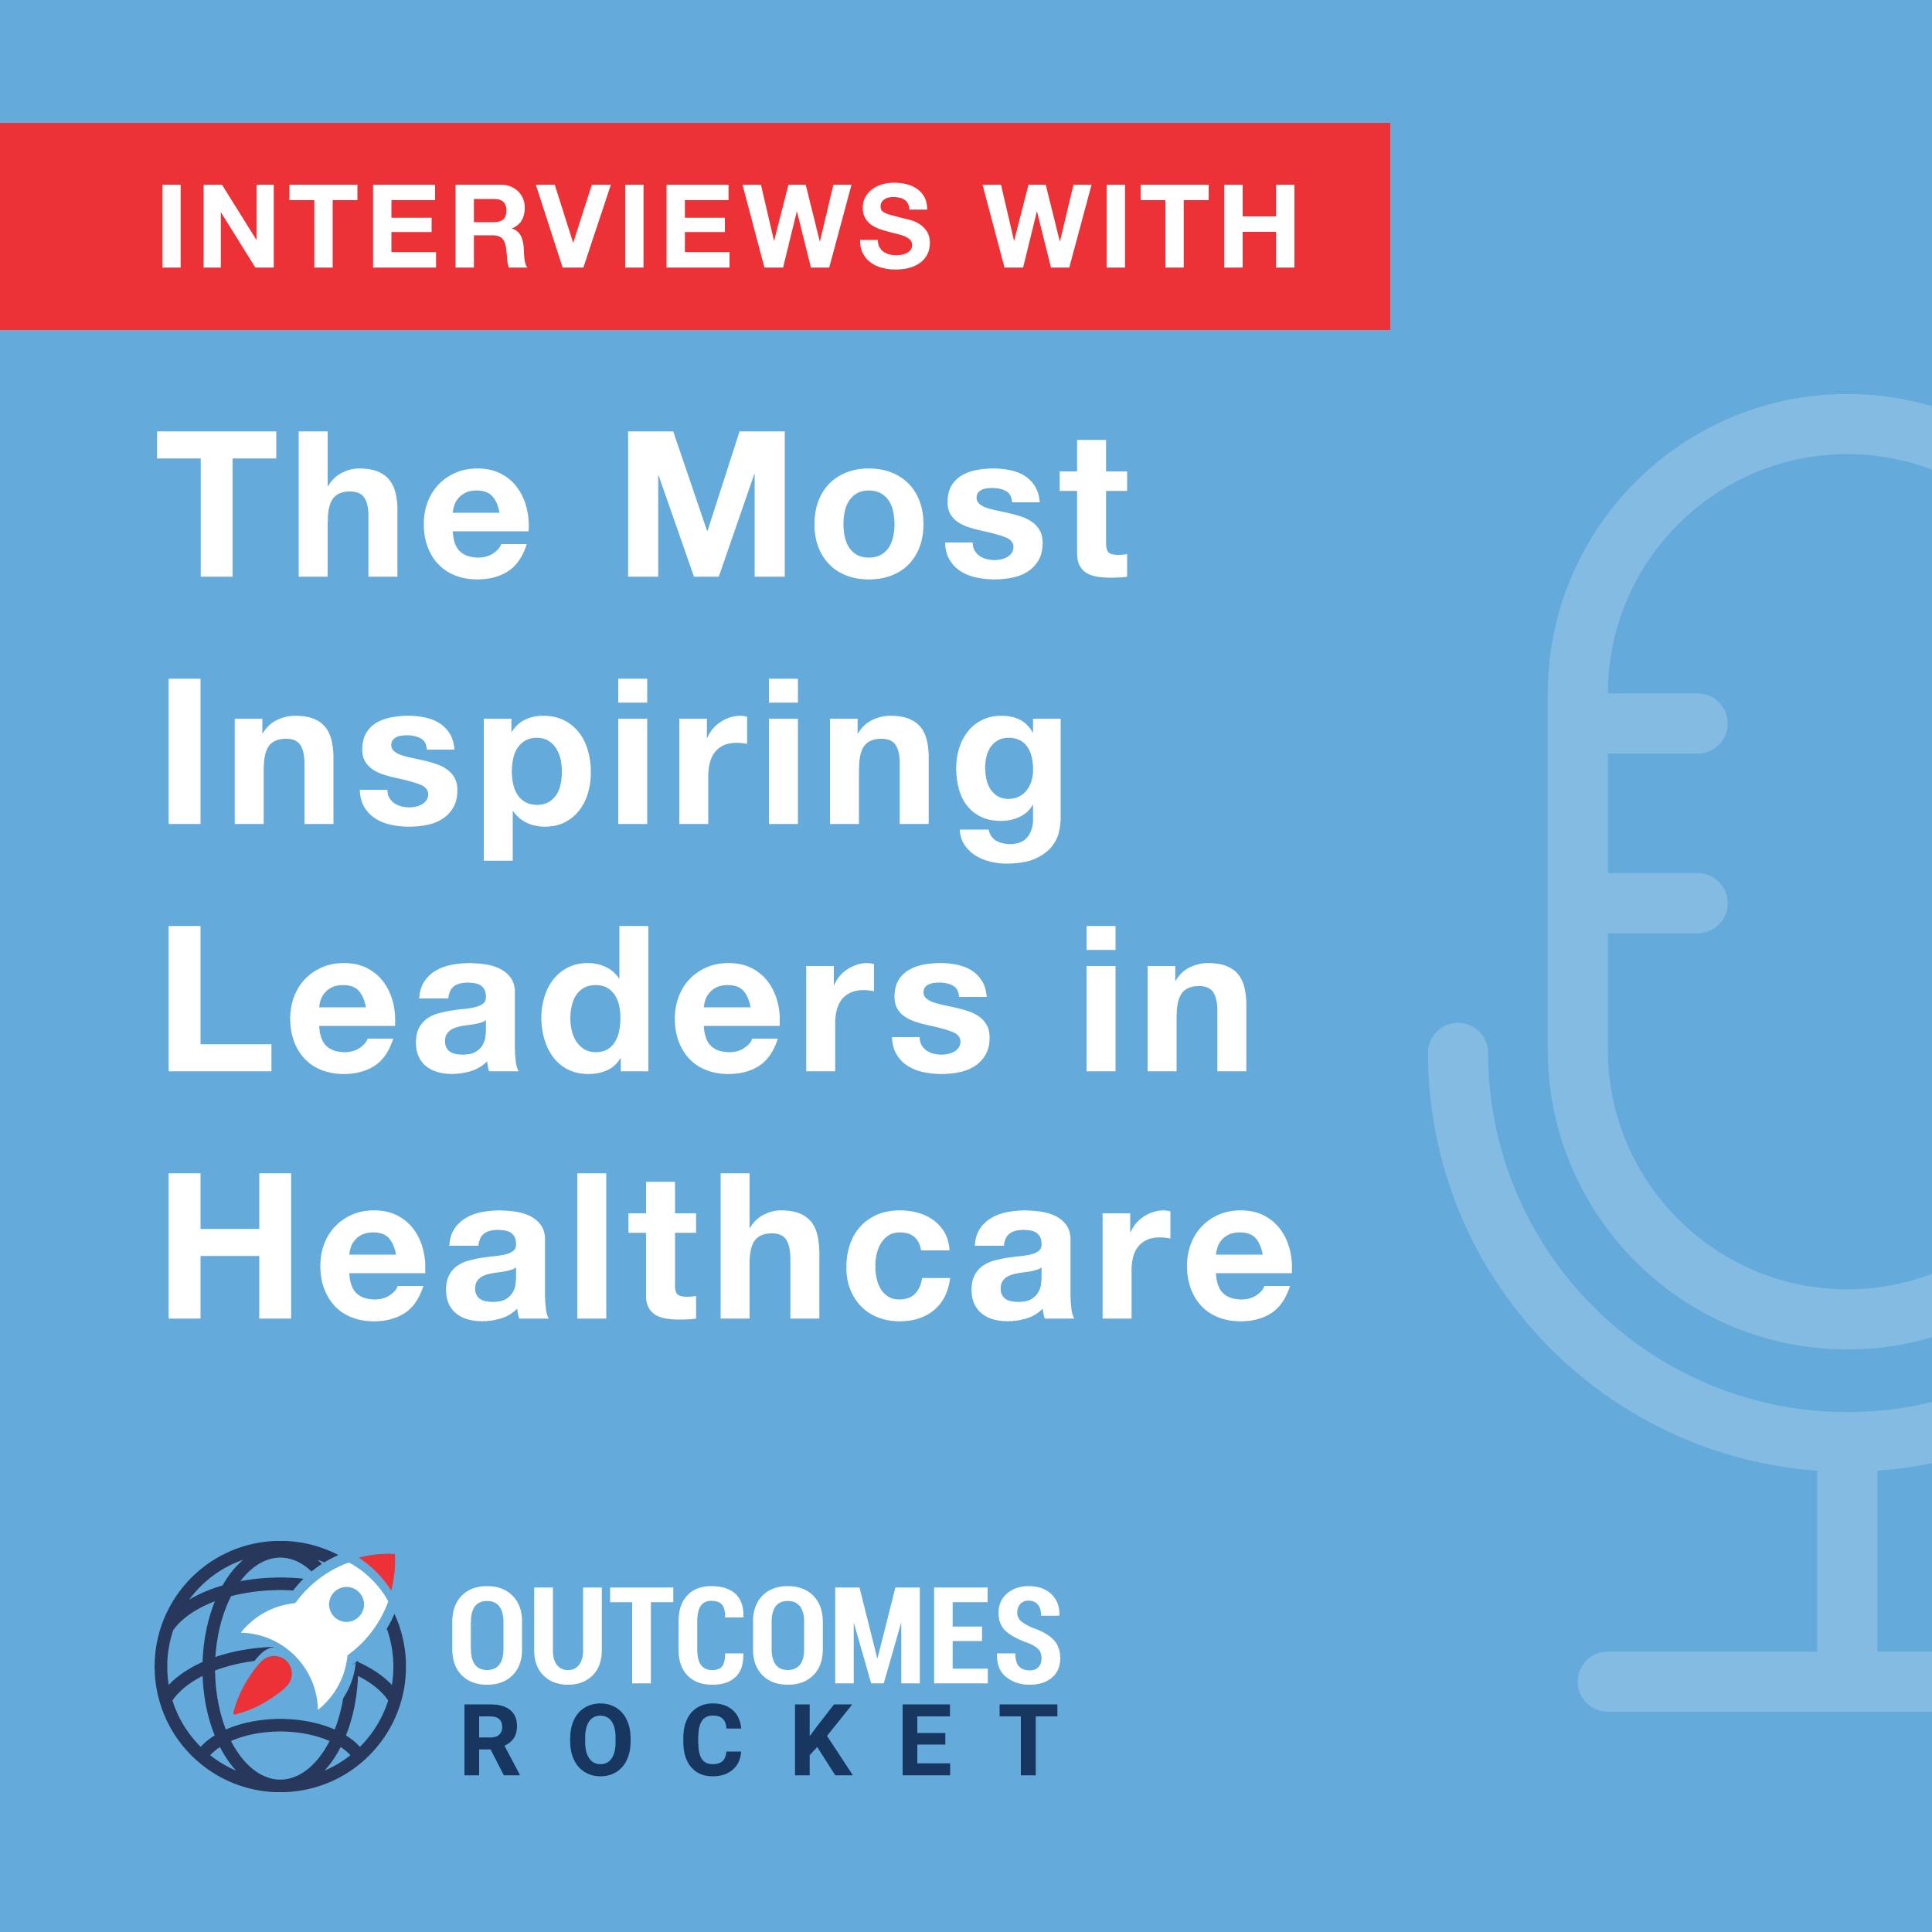 How to Improve Quality and Increase Patient Safety with Dr. Joy Bhosai, CEO at ChatrHealth and Samantha Sim, Product Manager at ChatrHealth